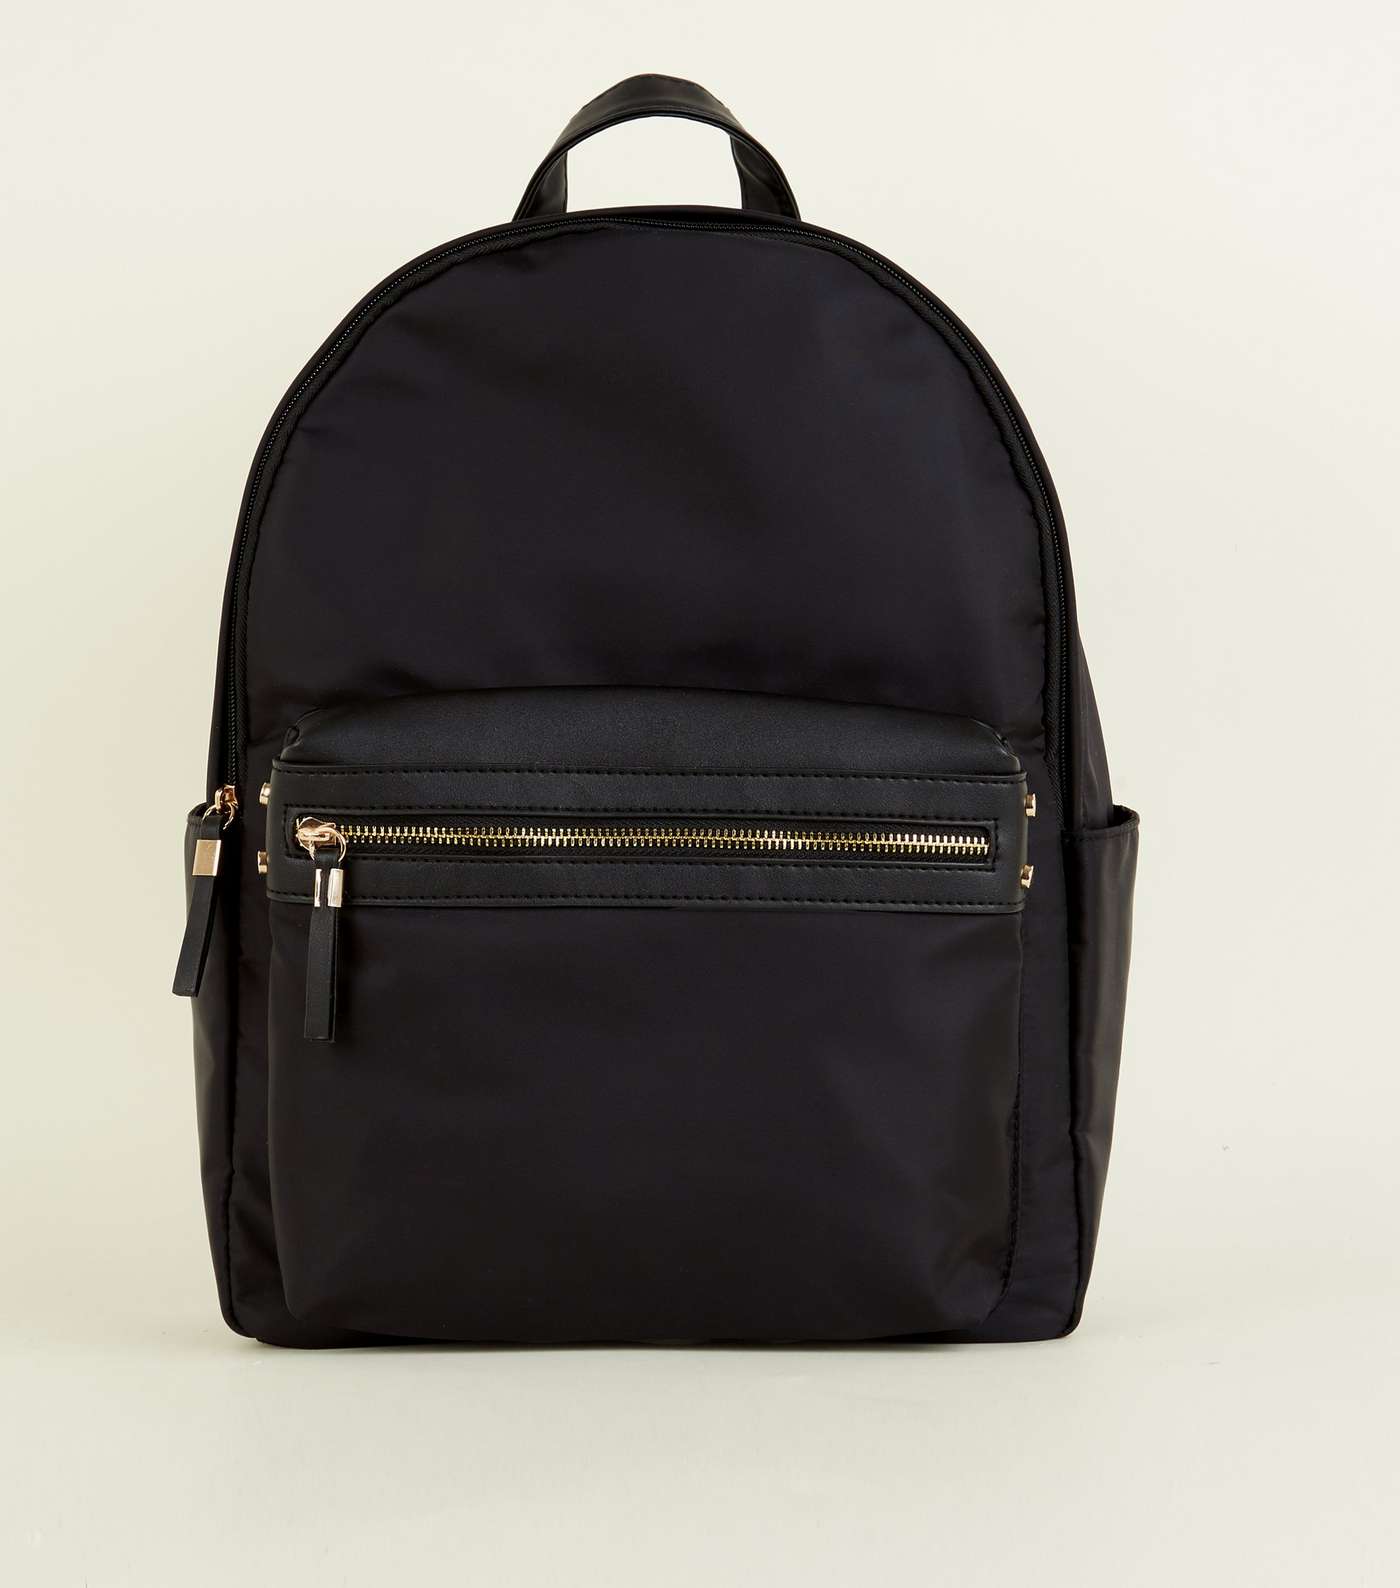 Black Nylon and Leather-Look Backpack